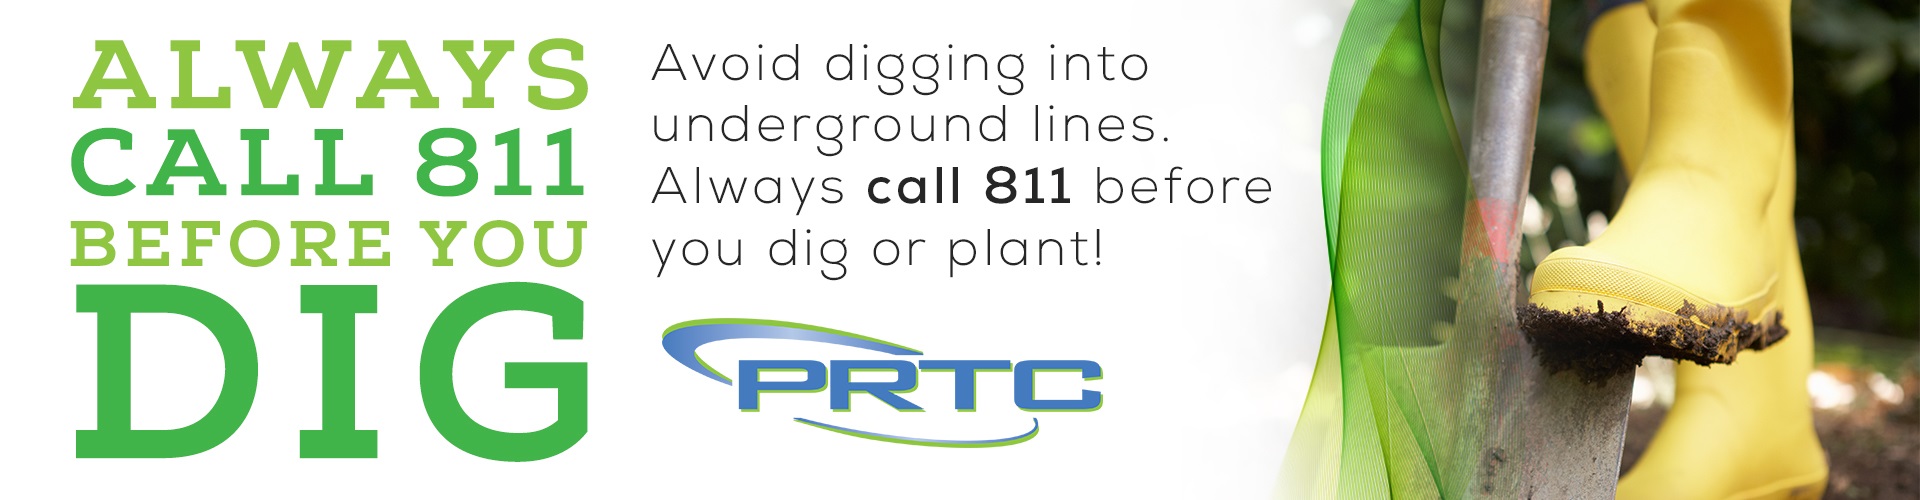 Always call 811 before you dig